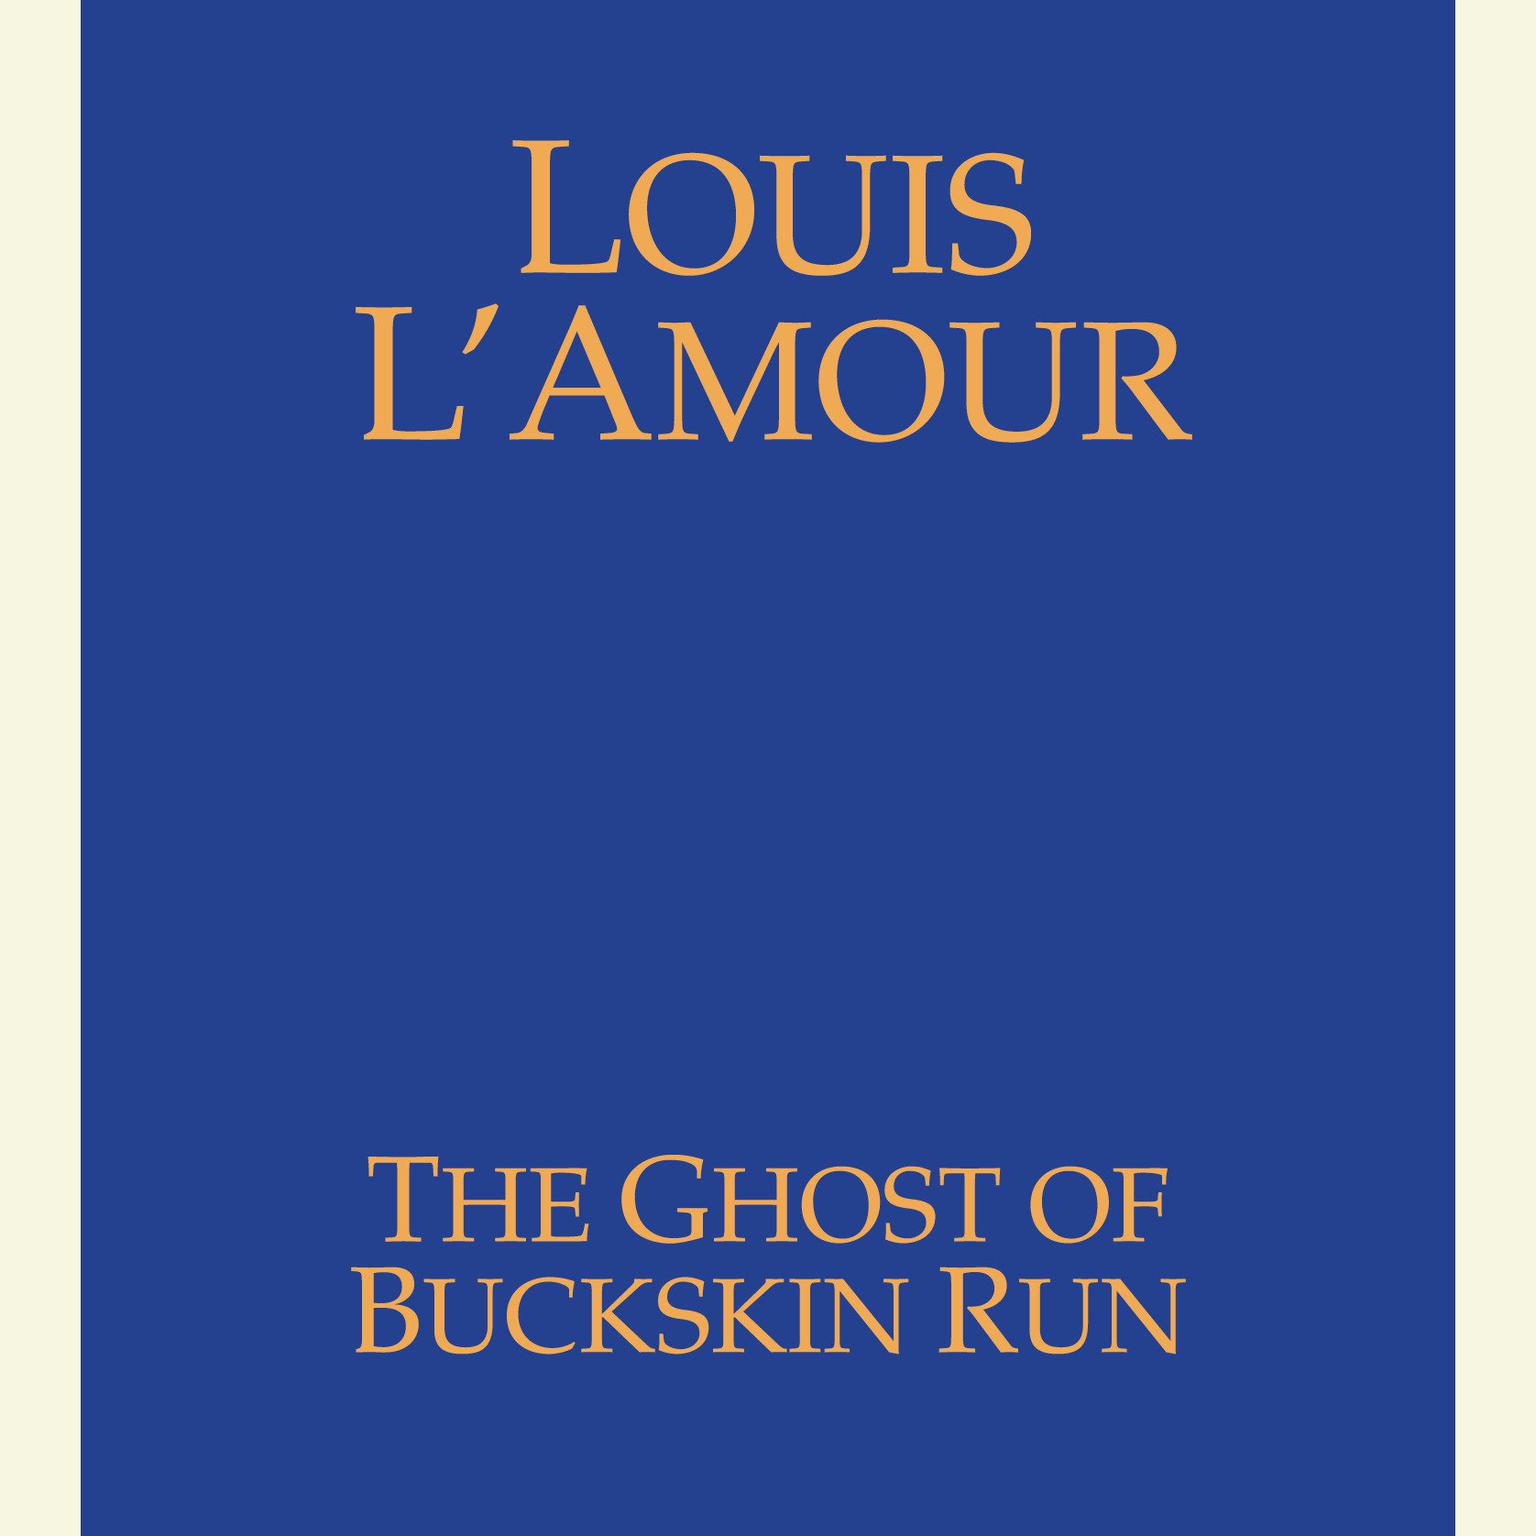 The Ghost of Buckskin Run Audiobook, by Louis L’Amour